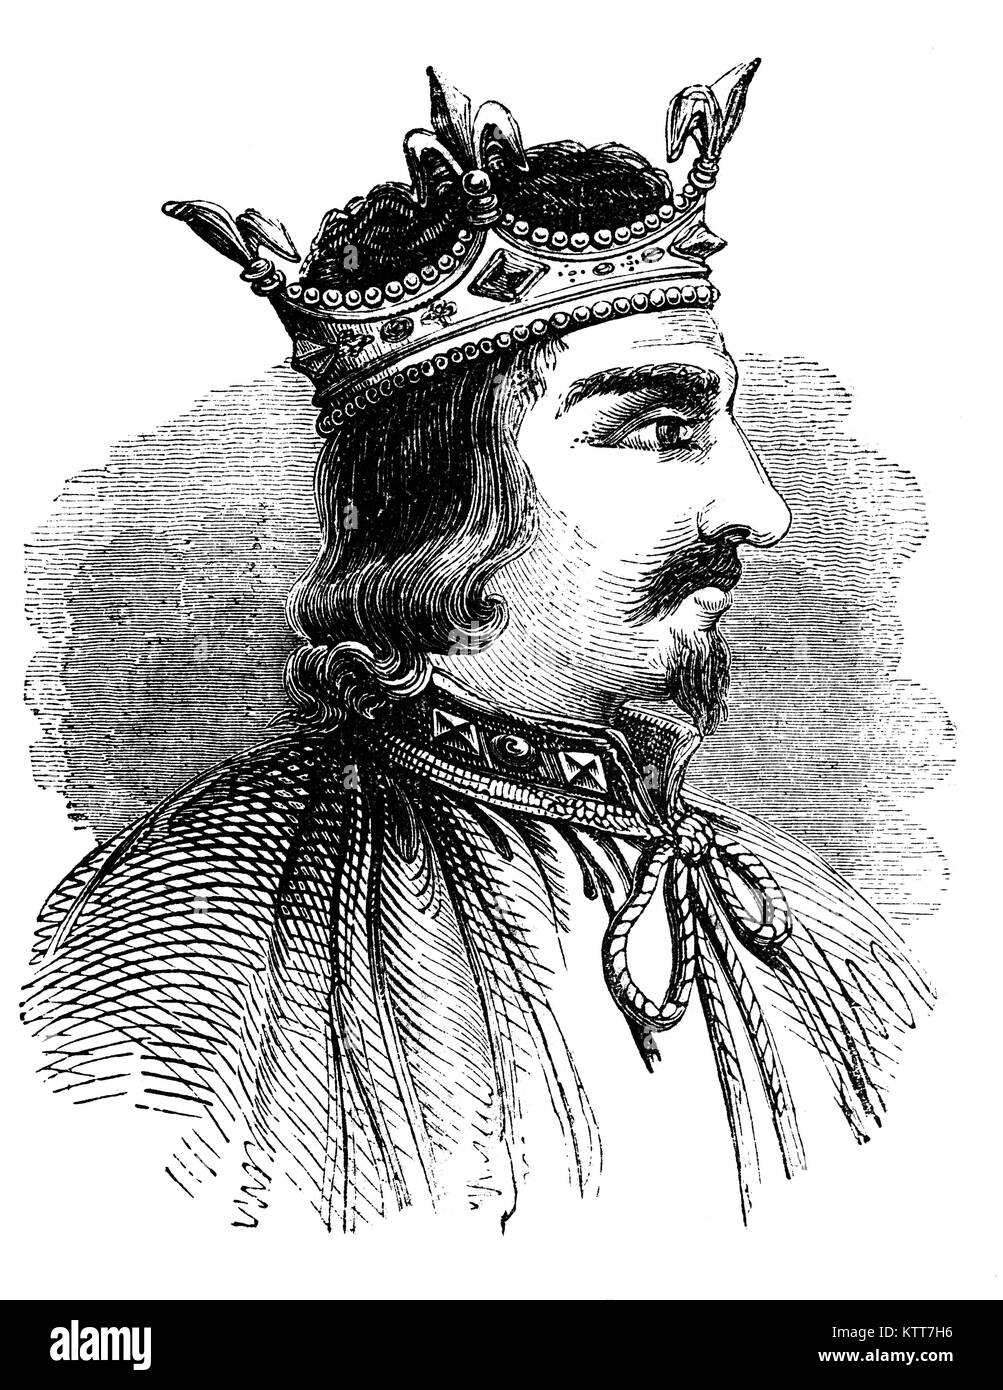 Stephen (1092/6 – 1154), often referred to as Stephen of Blois, was King of England from 1135 to his death, as well as Count of Boulogne from 1125 until 1147 and Duke of Normandy from 1135 until 1144. Stephen's reign was marked by the Anarchy, a civil war with his cousin and rival, the Empress Matilda. Stock Photo